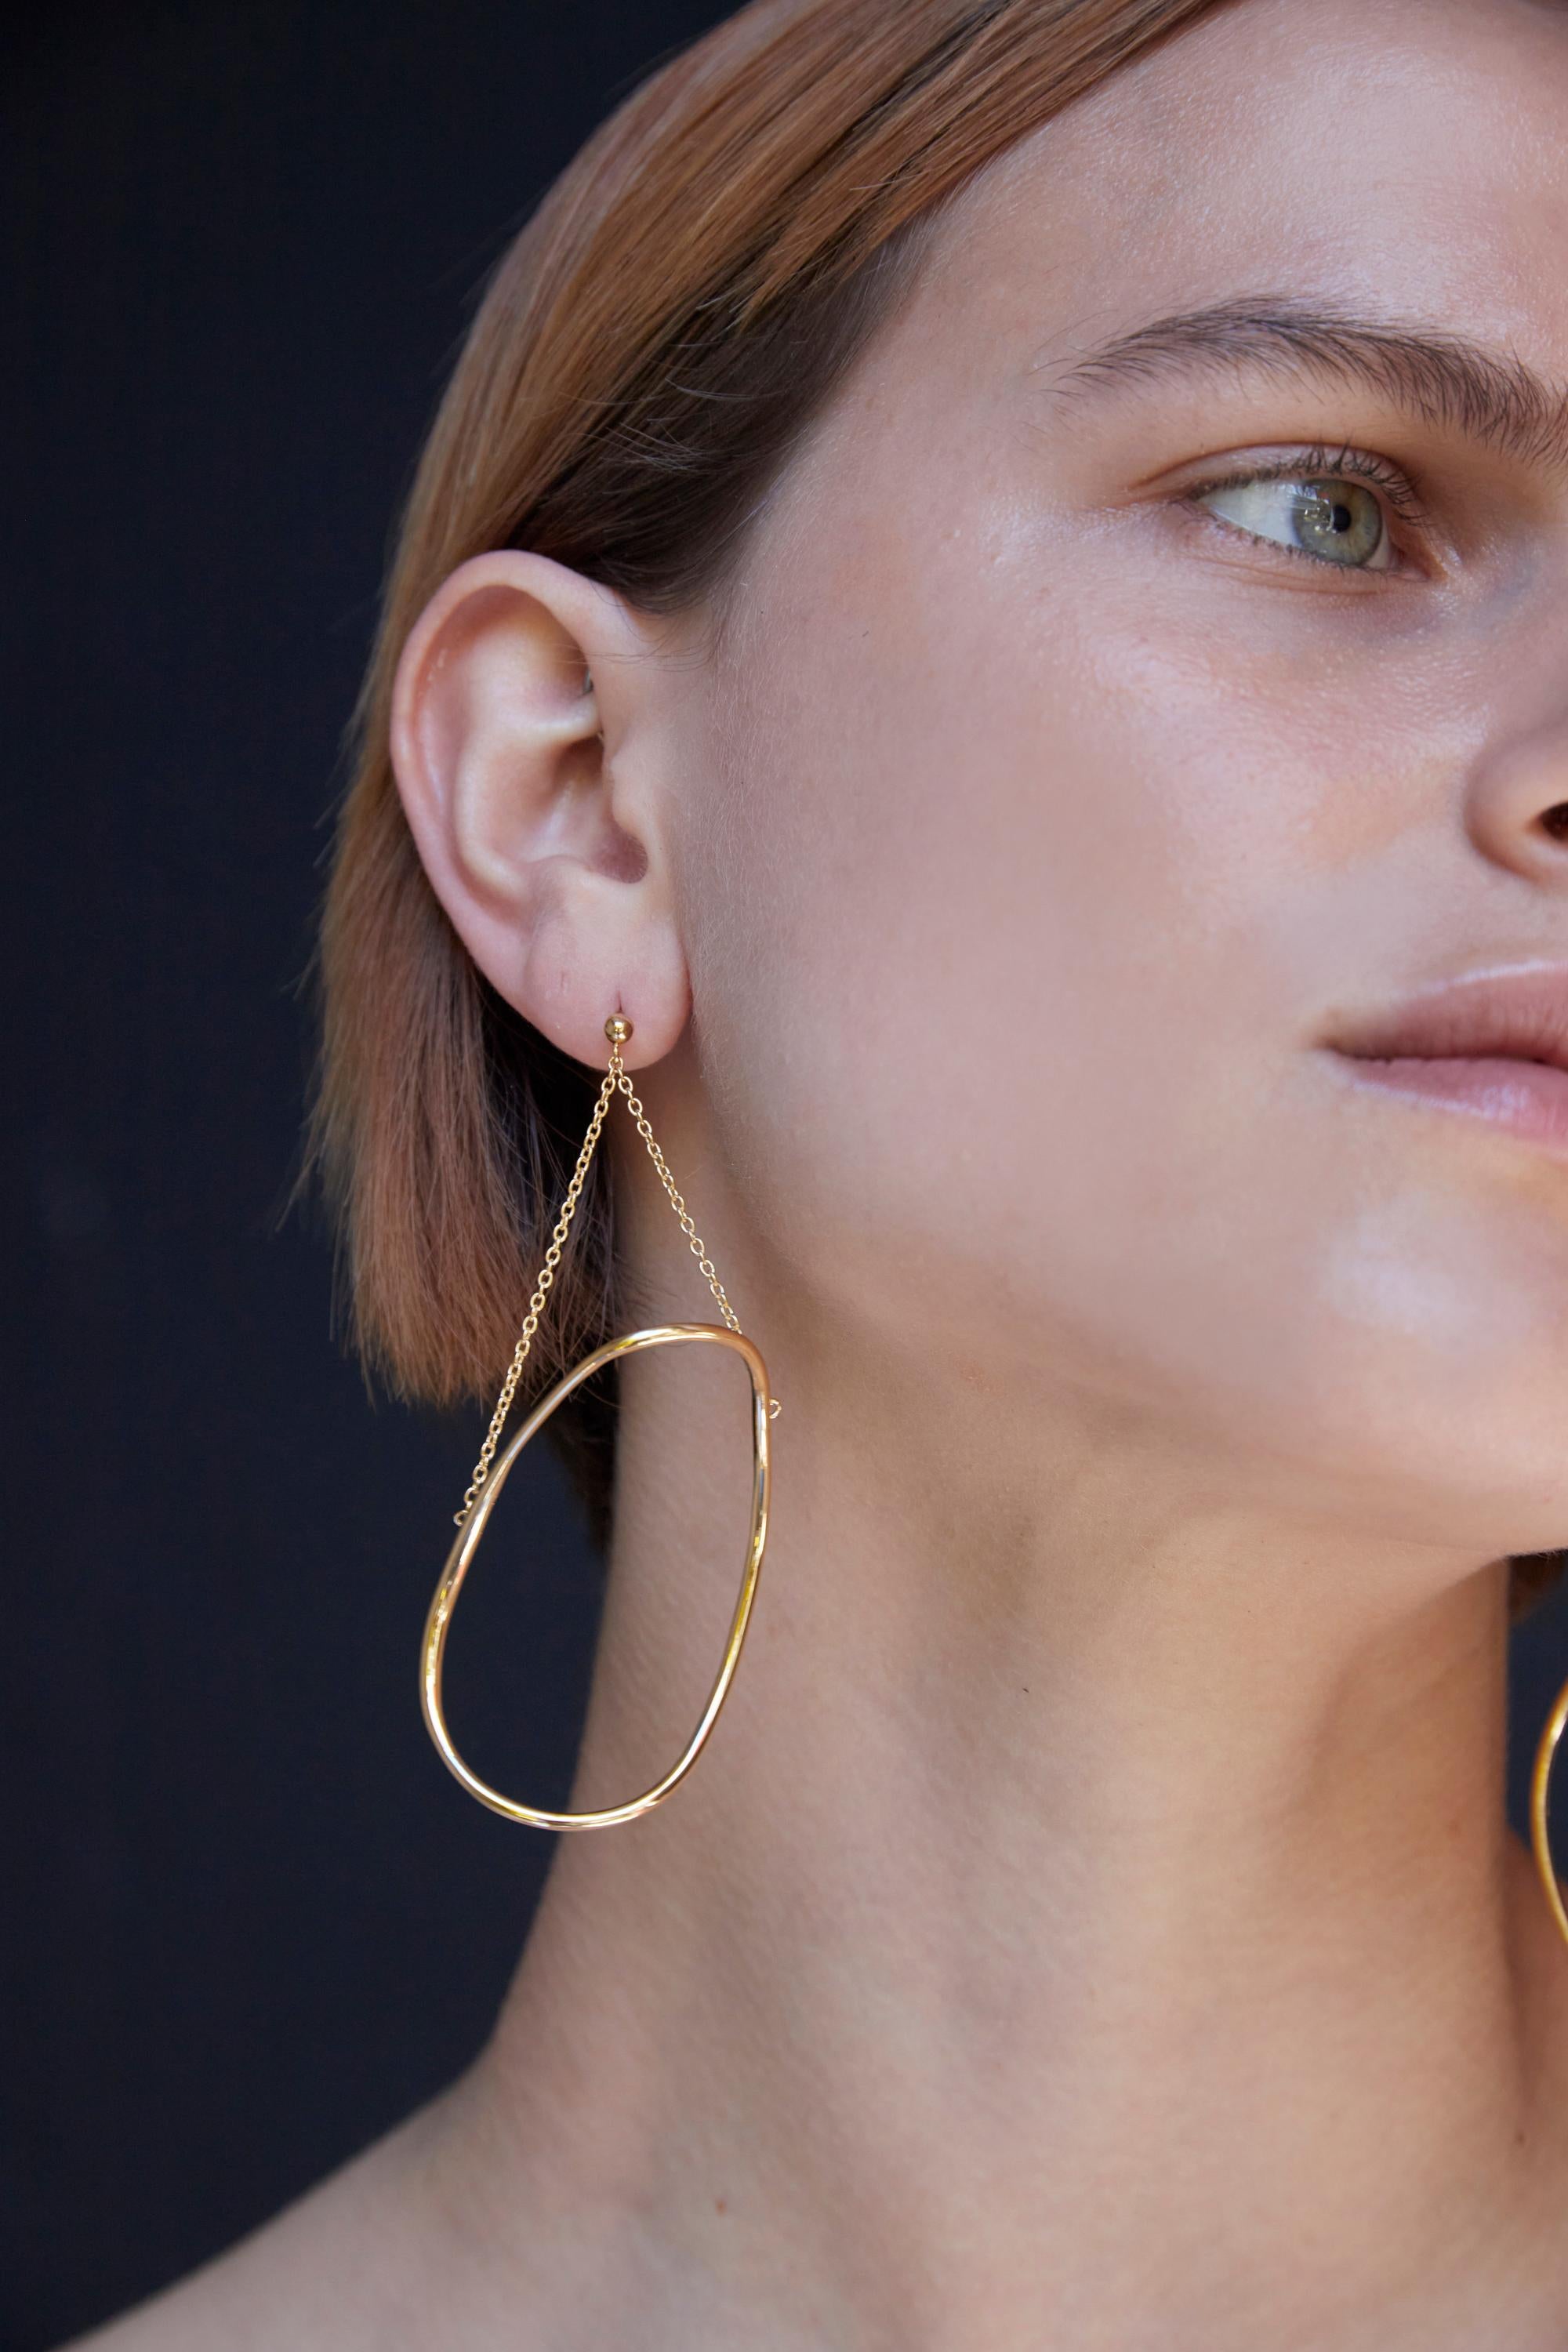 Modernist Abstract Dangle Hoop Earrings, 18 Carat Gold Plated Recycled Silver  For Sale